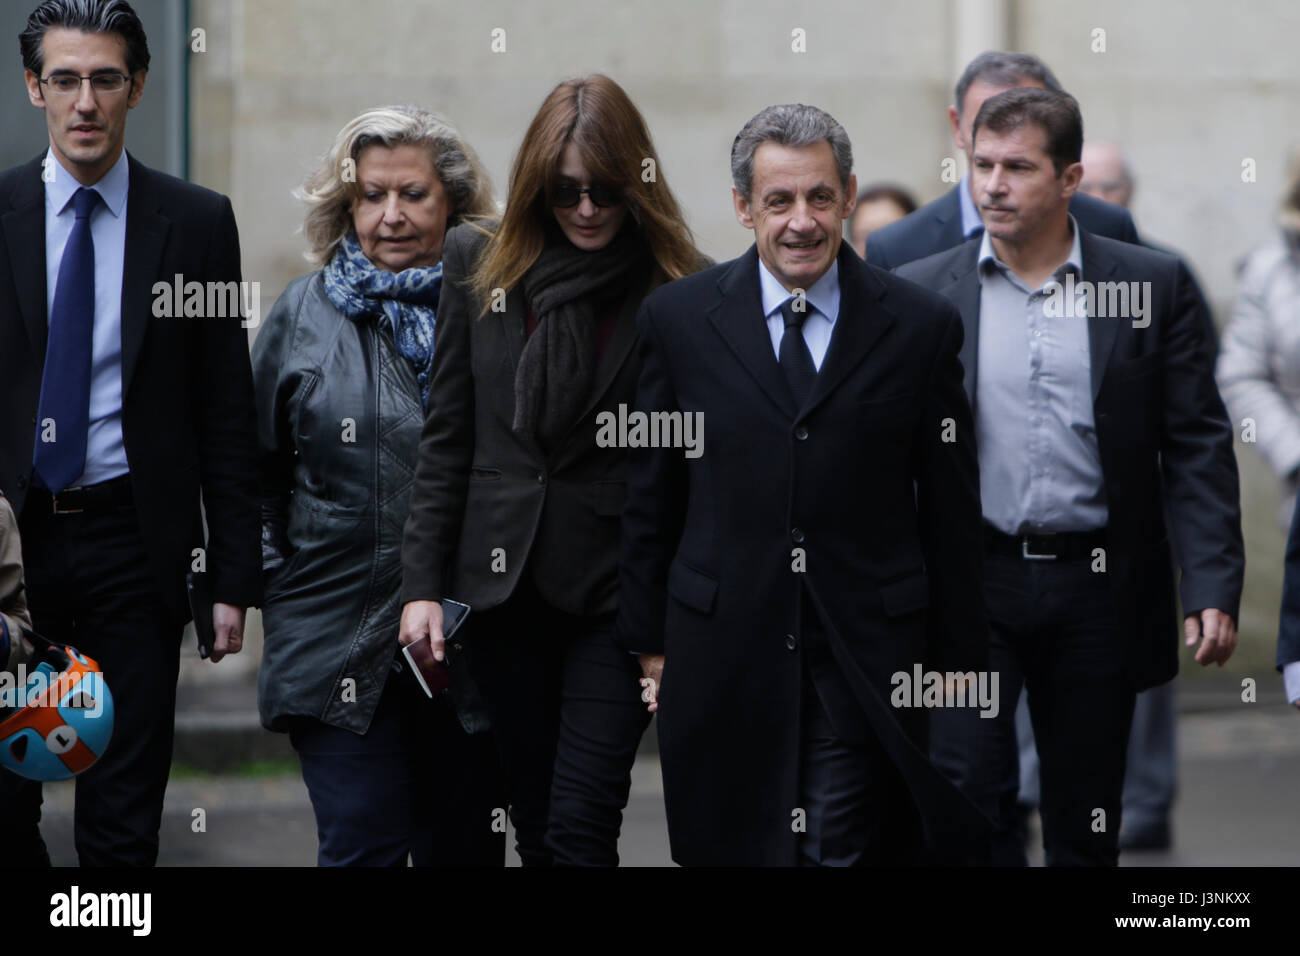 Paris, France. 7th May 2017. Nicolas Sarkozy and Carla Bruni arrive at the polling station. The former French President Nicolas Sarkozy has cast his vote three hours after the opening of the polls at a school in Paris. He was accompanied by his wife the singer Carla Bruni. Credit: Michael Debets/Alamy Live News Stock Photo